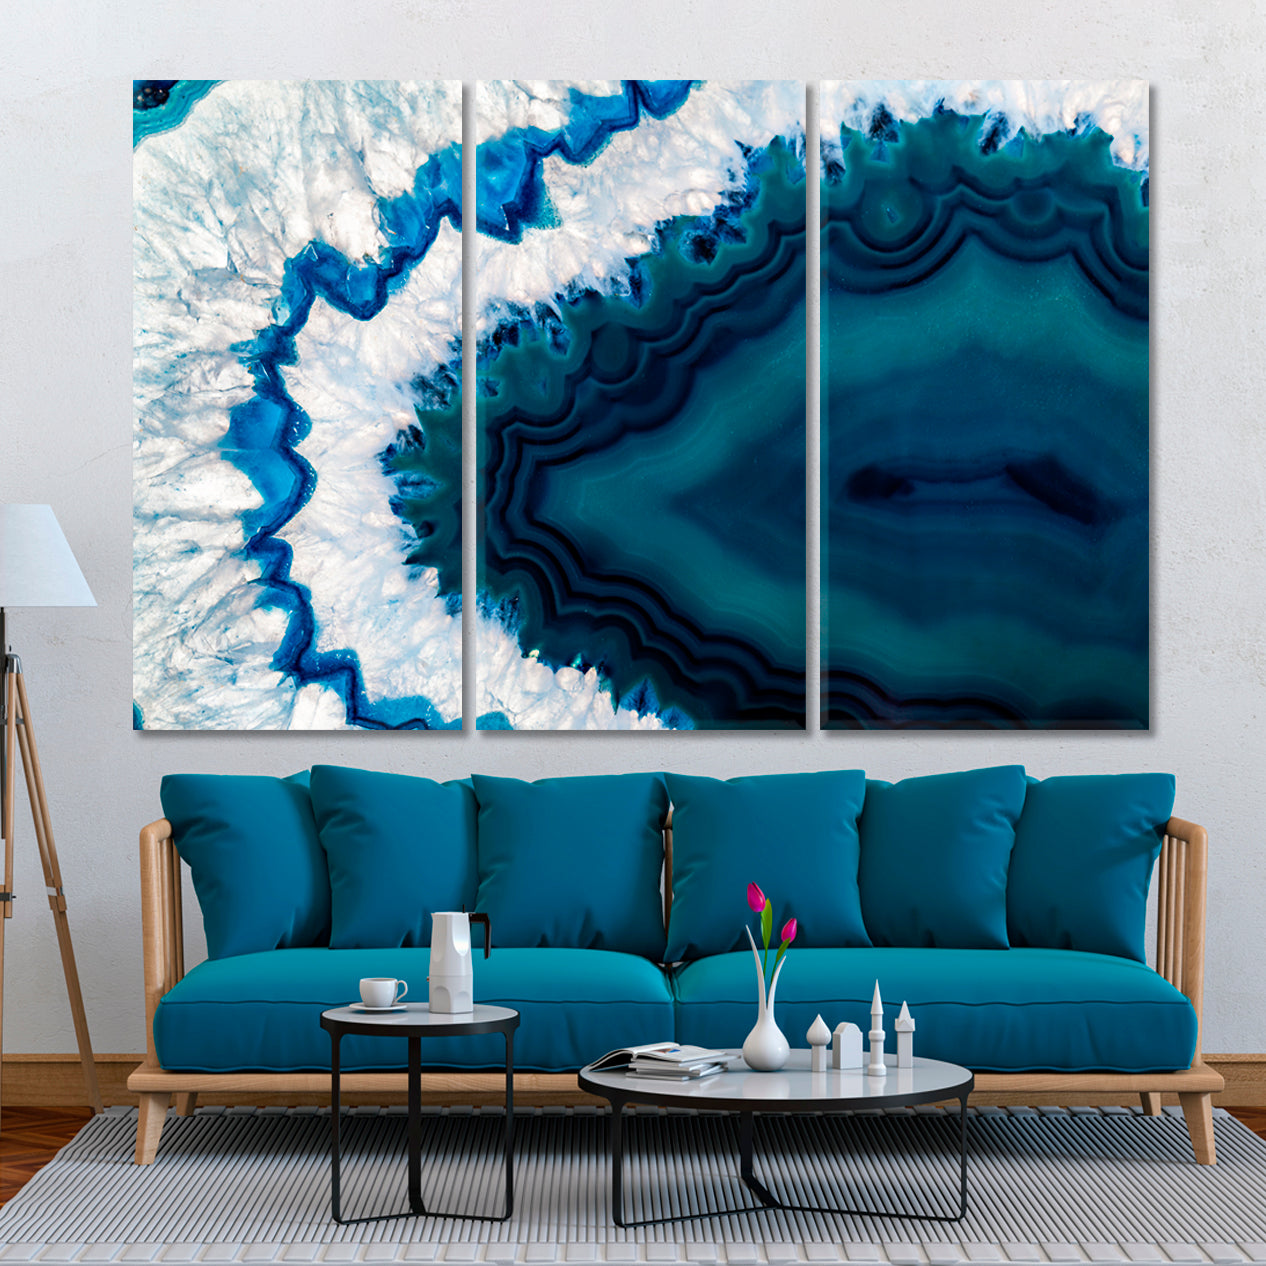 GEODE AGATE Cross-section Brazilian Blue Geo Crystal Marble Abstract Art Print Artesty 3 panels 36" x 24" 